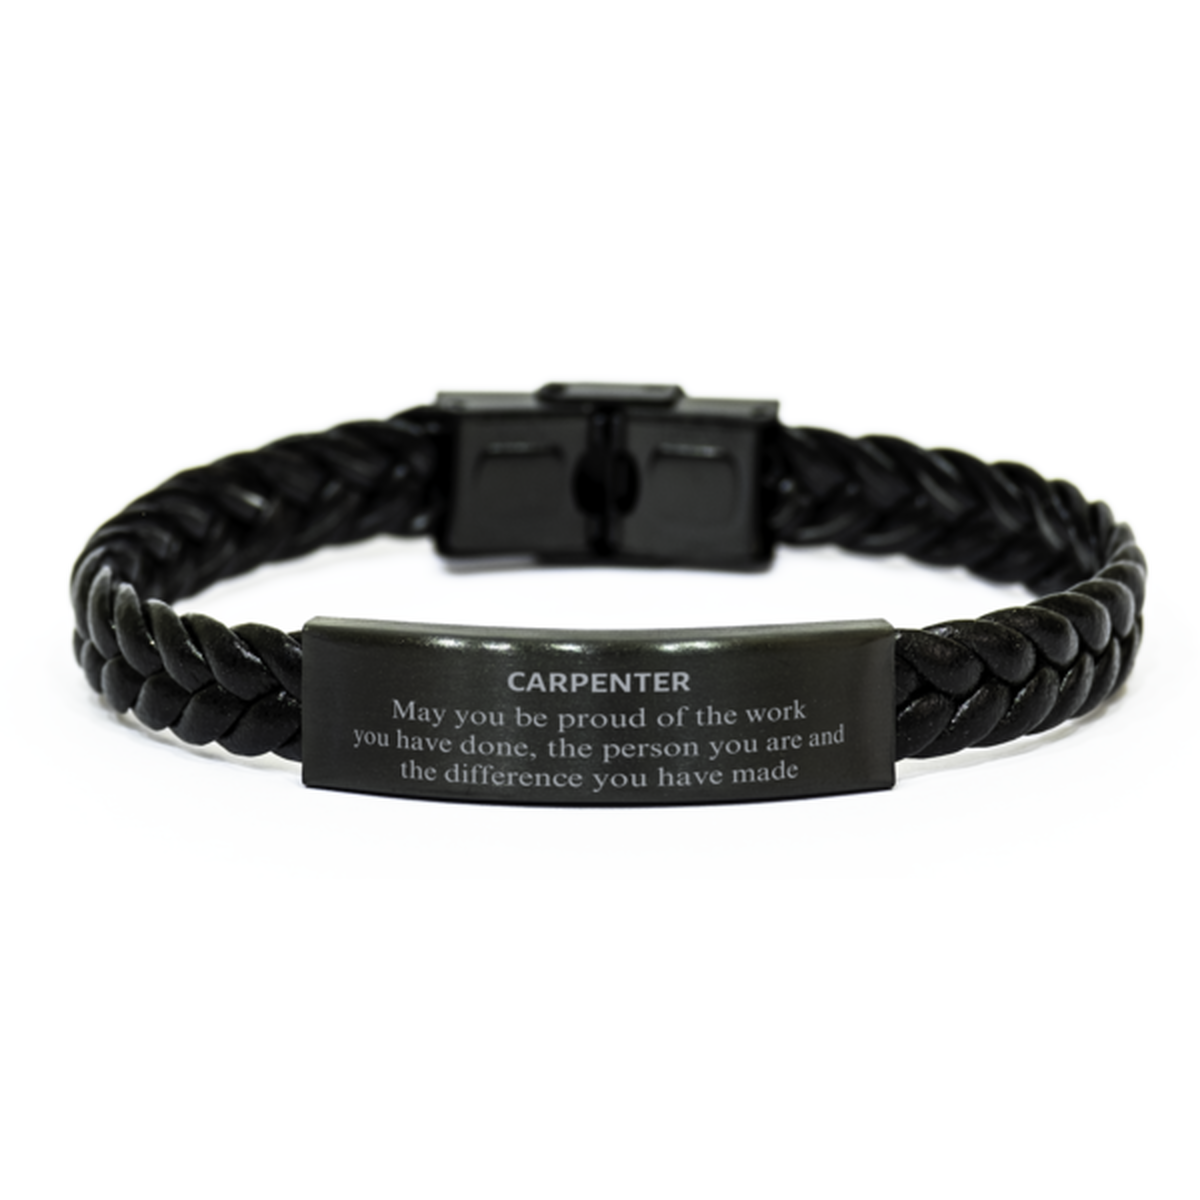 Carpenter May you be proud of the work you have done, Retirement Carpenter Braided Leather Bracelet for Colleague Appreciation Gifts Amazing for Carpenter